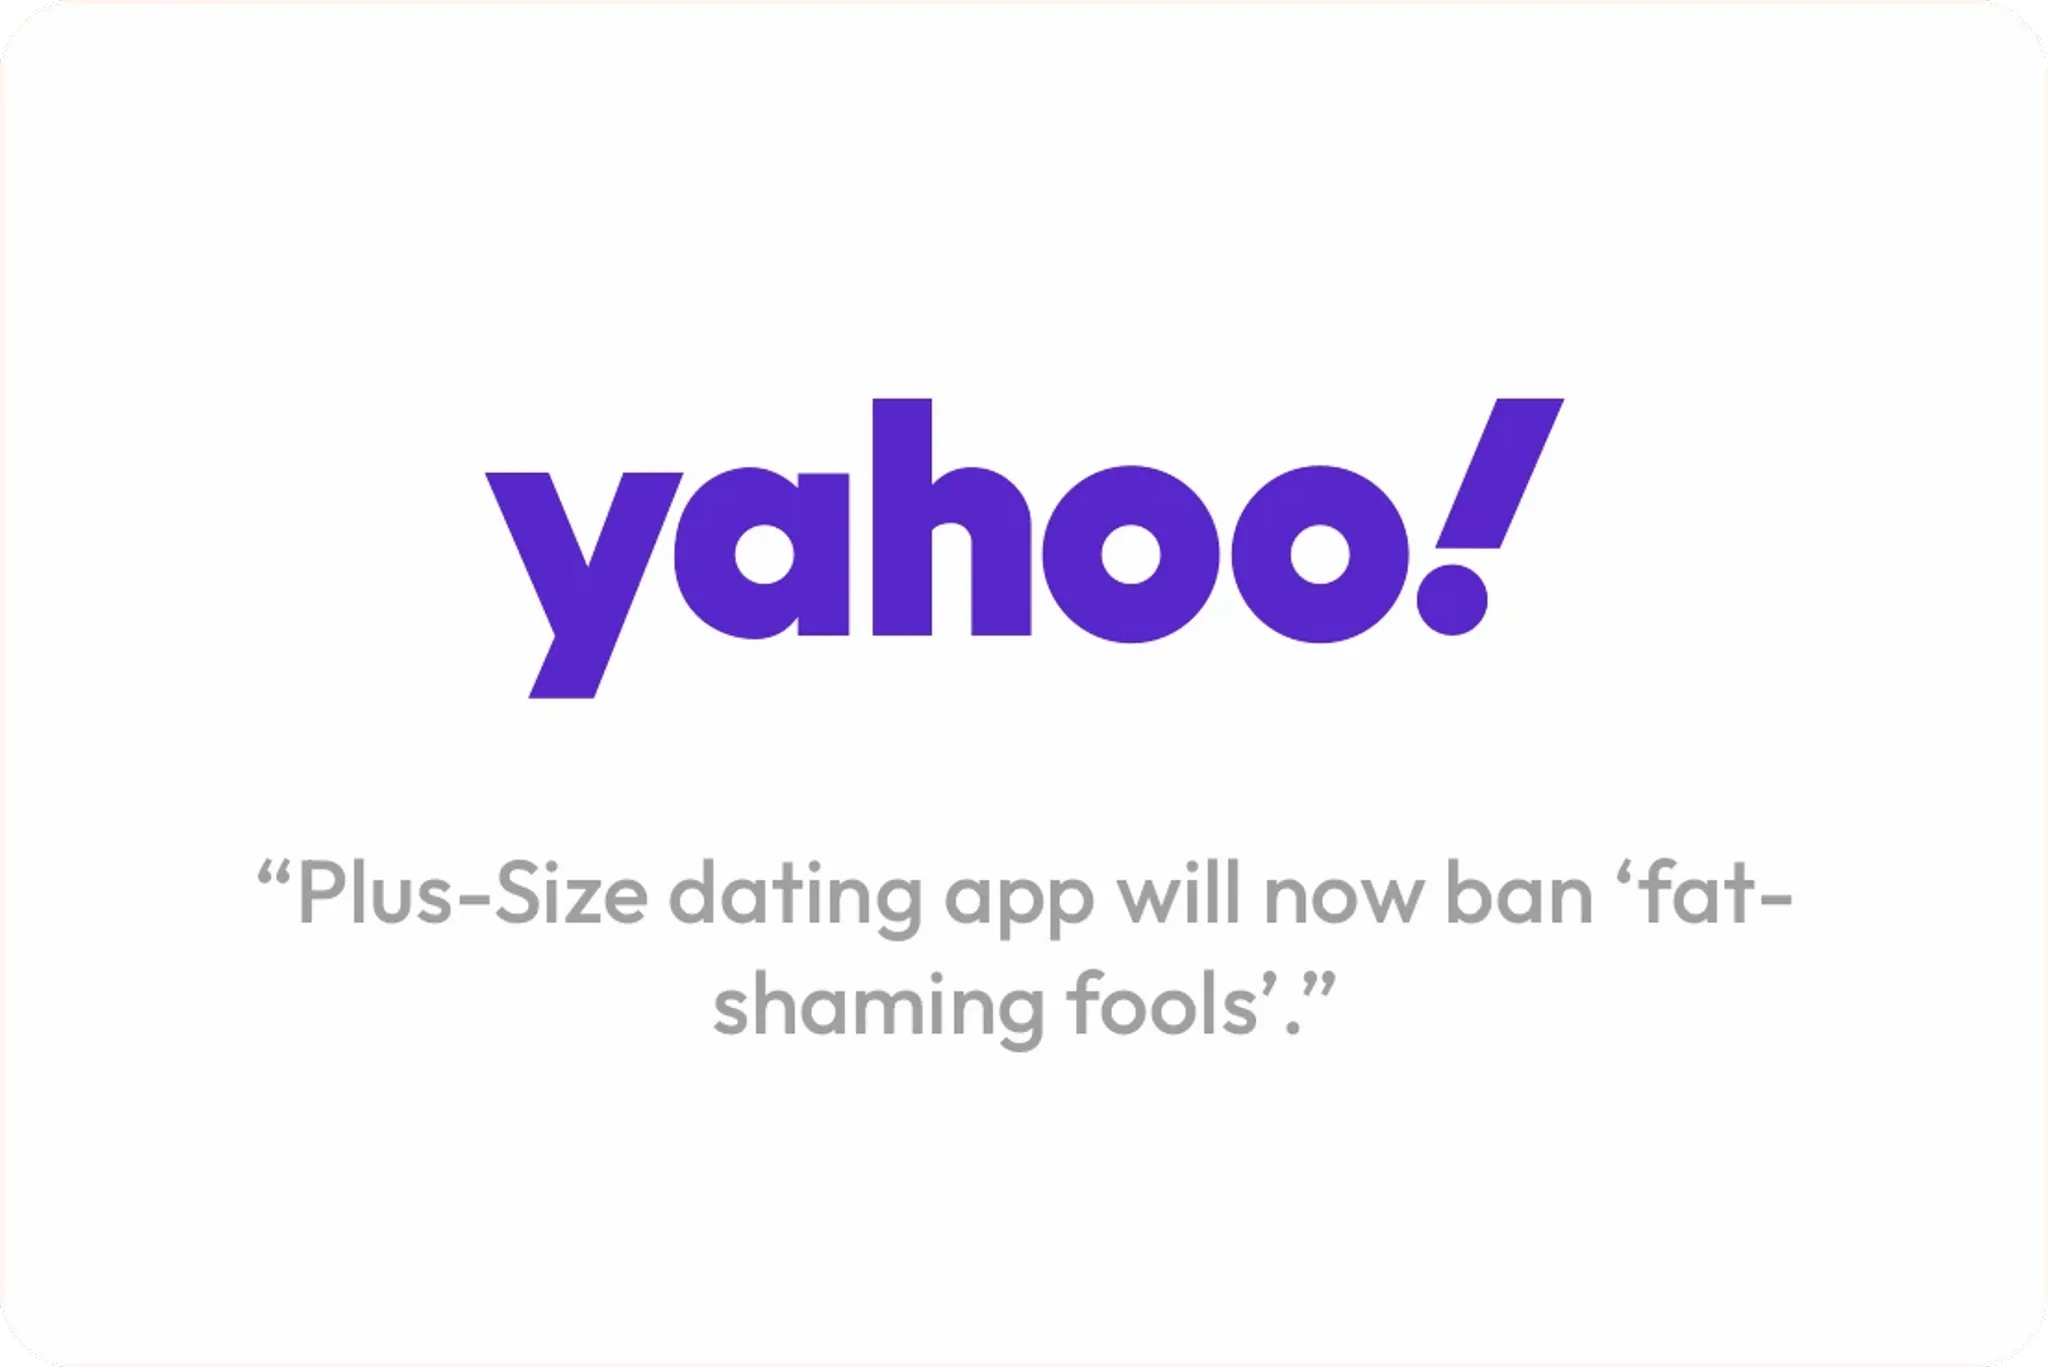 https://www.yahoo.com/style/plus-size-dating-app-will-now-ban-fat-shaming-fools-030409517.html